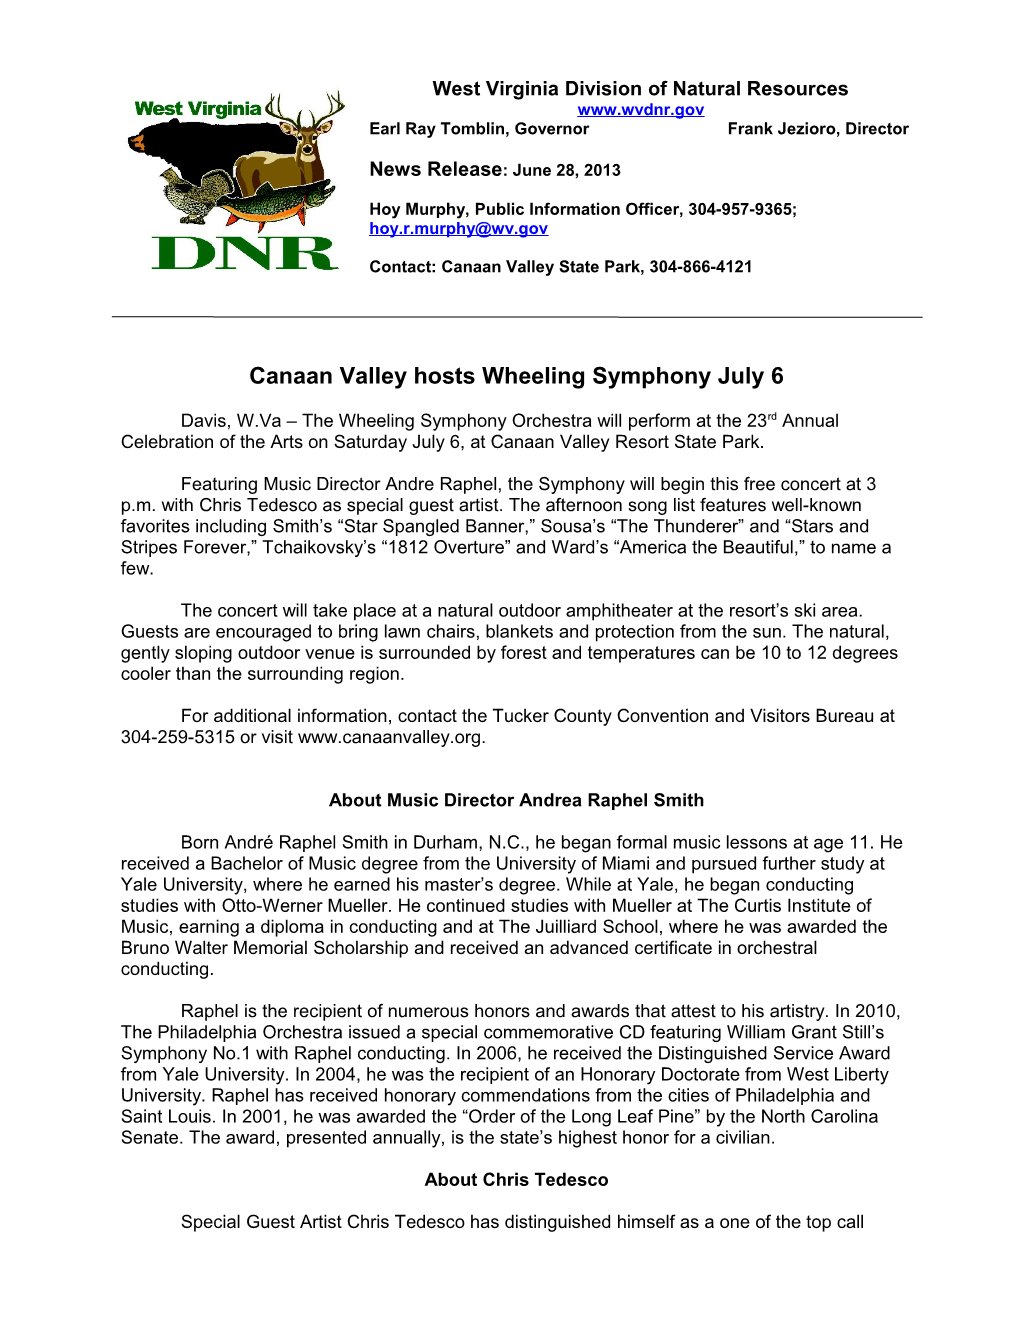 Canaan Valley Hosts Wheeling Symphony July 6